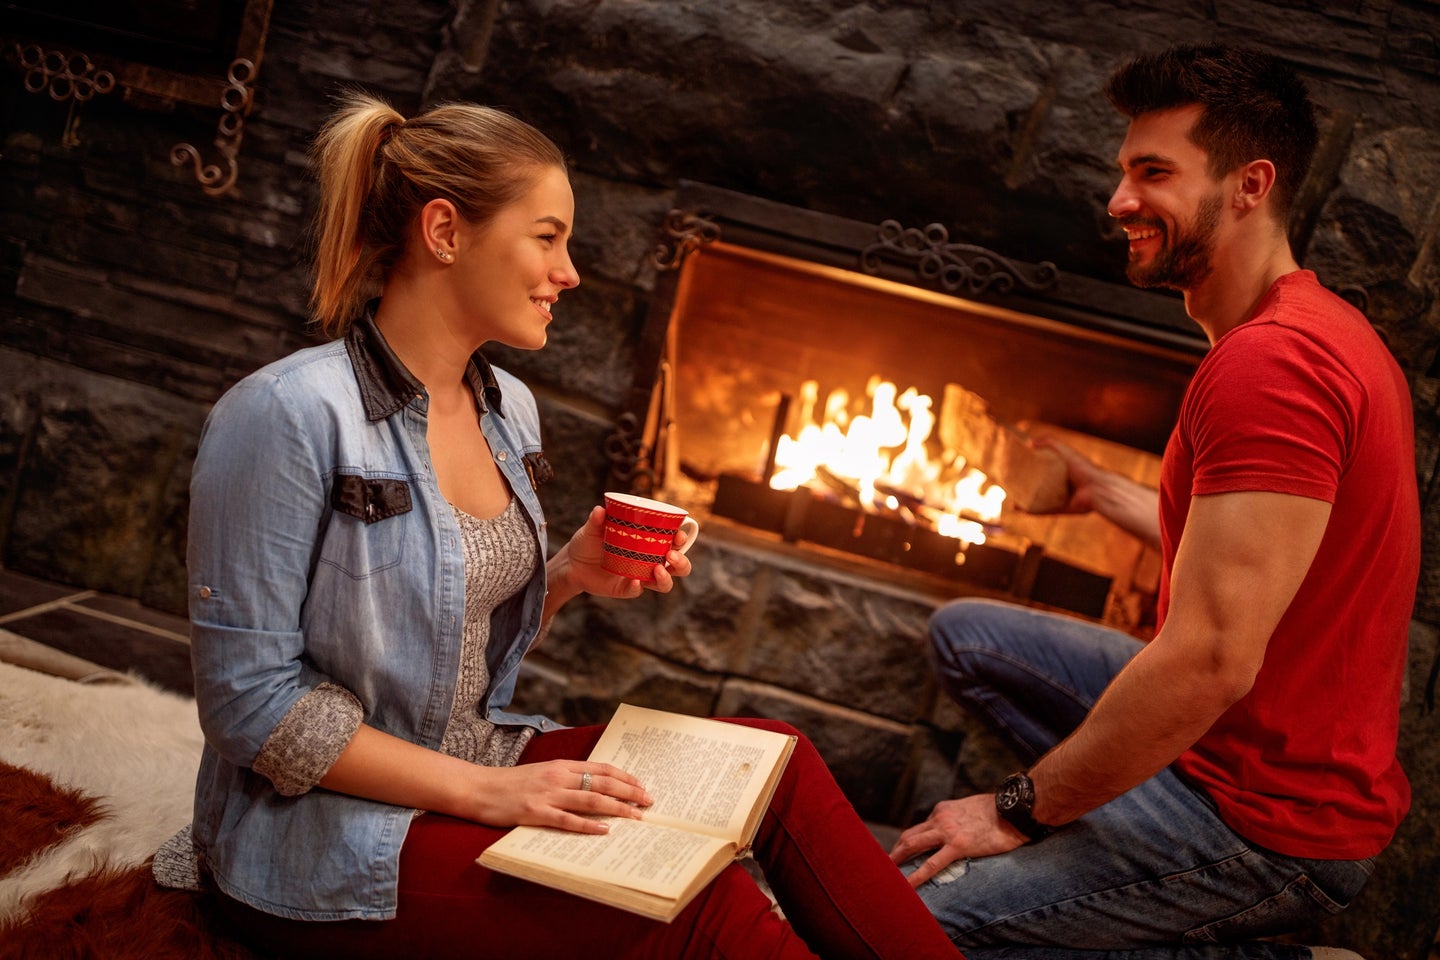 Person with long blond hair holding a book and cup of tea and smiling at a person with short brown hear and a red t-shirt in front of a family fireplace during the holidays